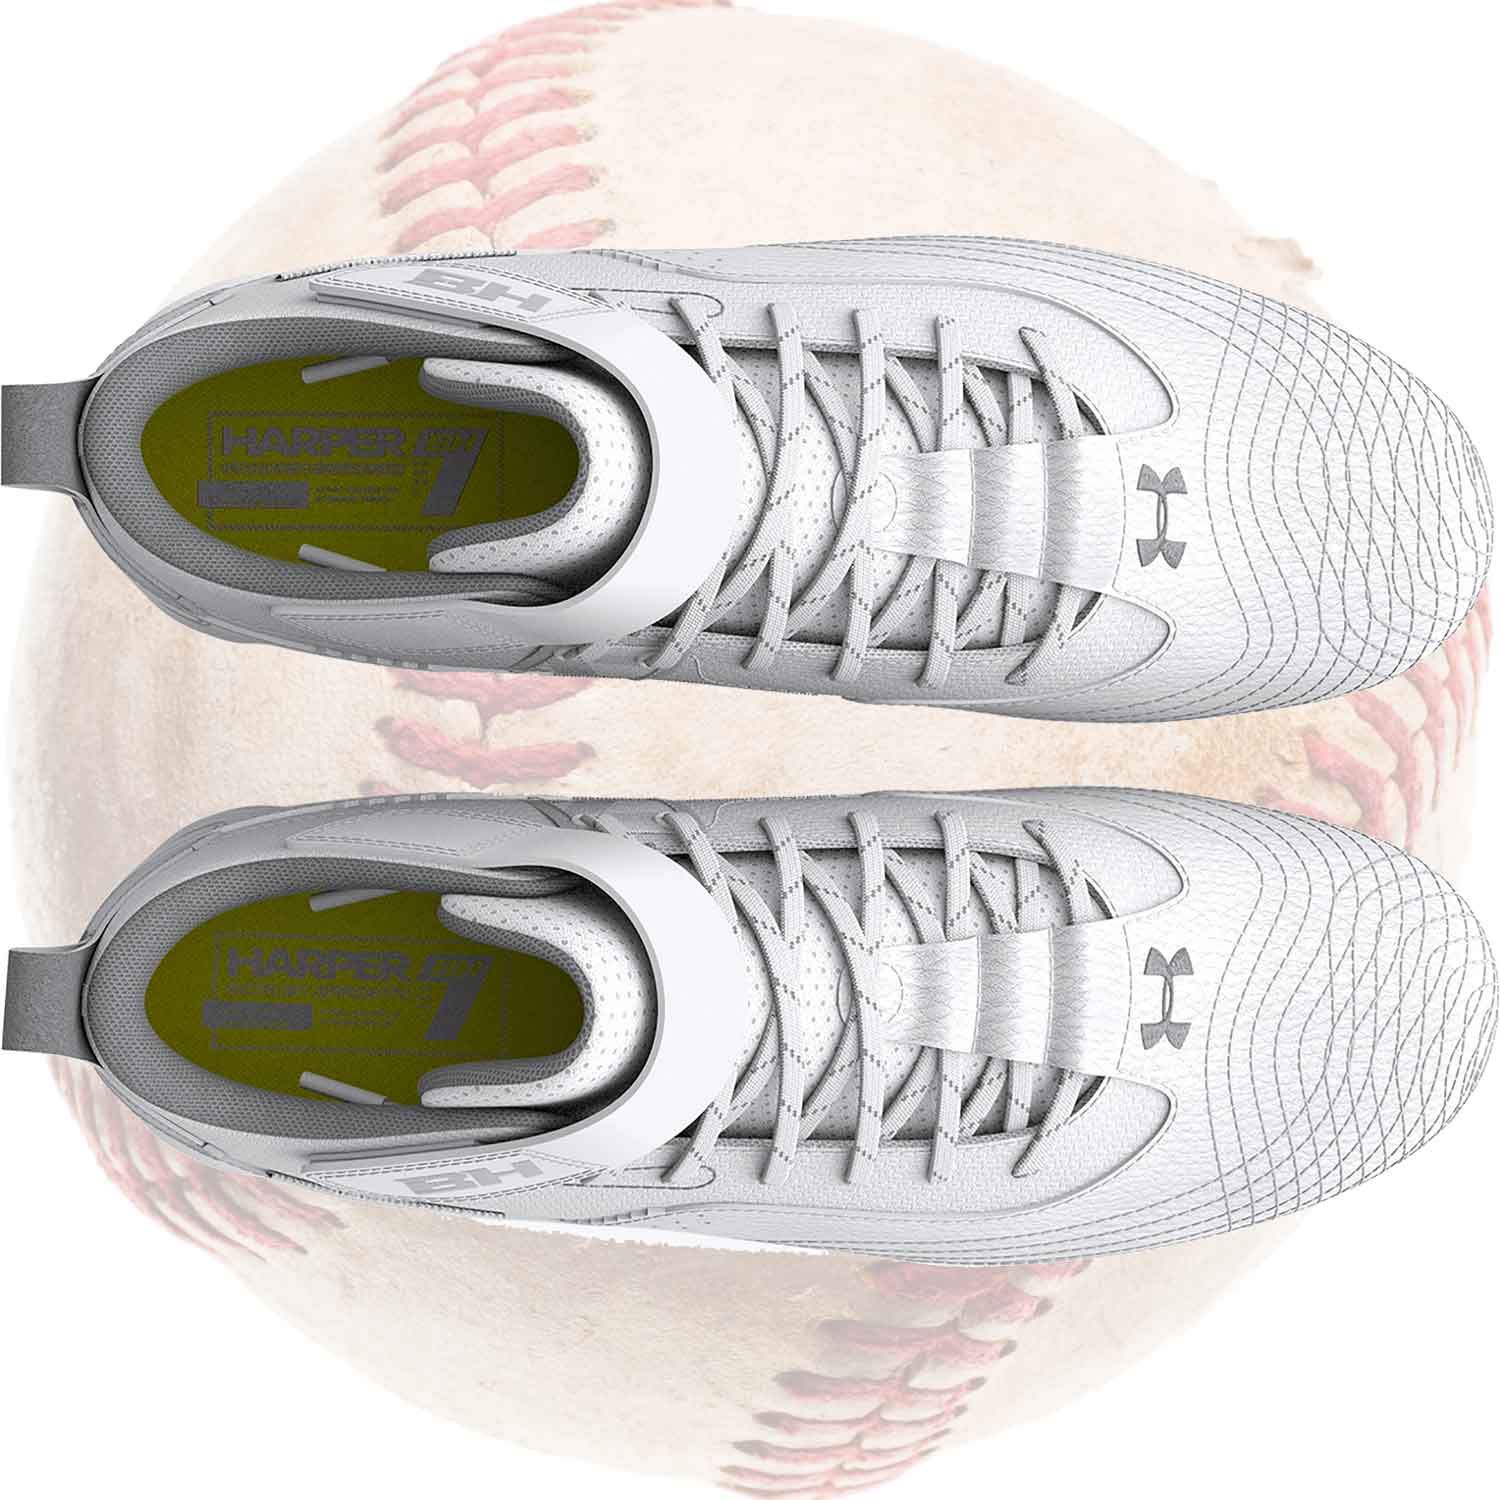 Under Armour Bryce Harper 7 Baseball Shoes - Synthetic Leather and Micro Mesh Upper